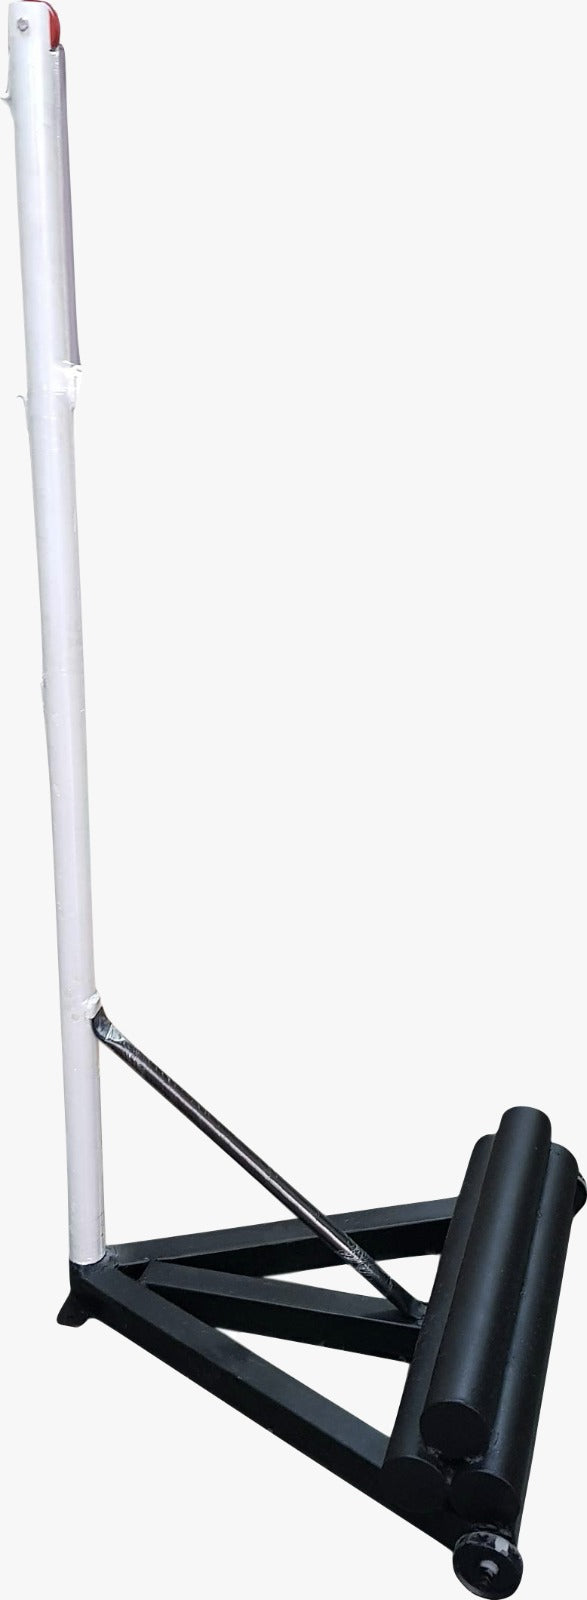 Baspo Volleyball Pole Movable 60kg Weight Inside